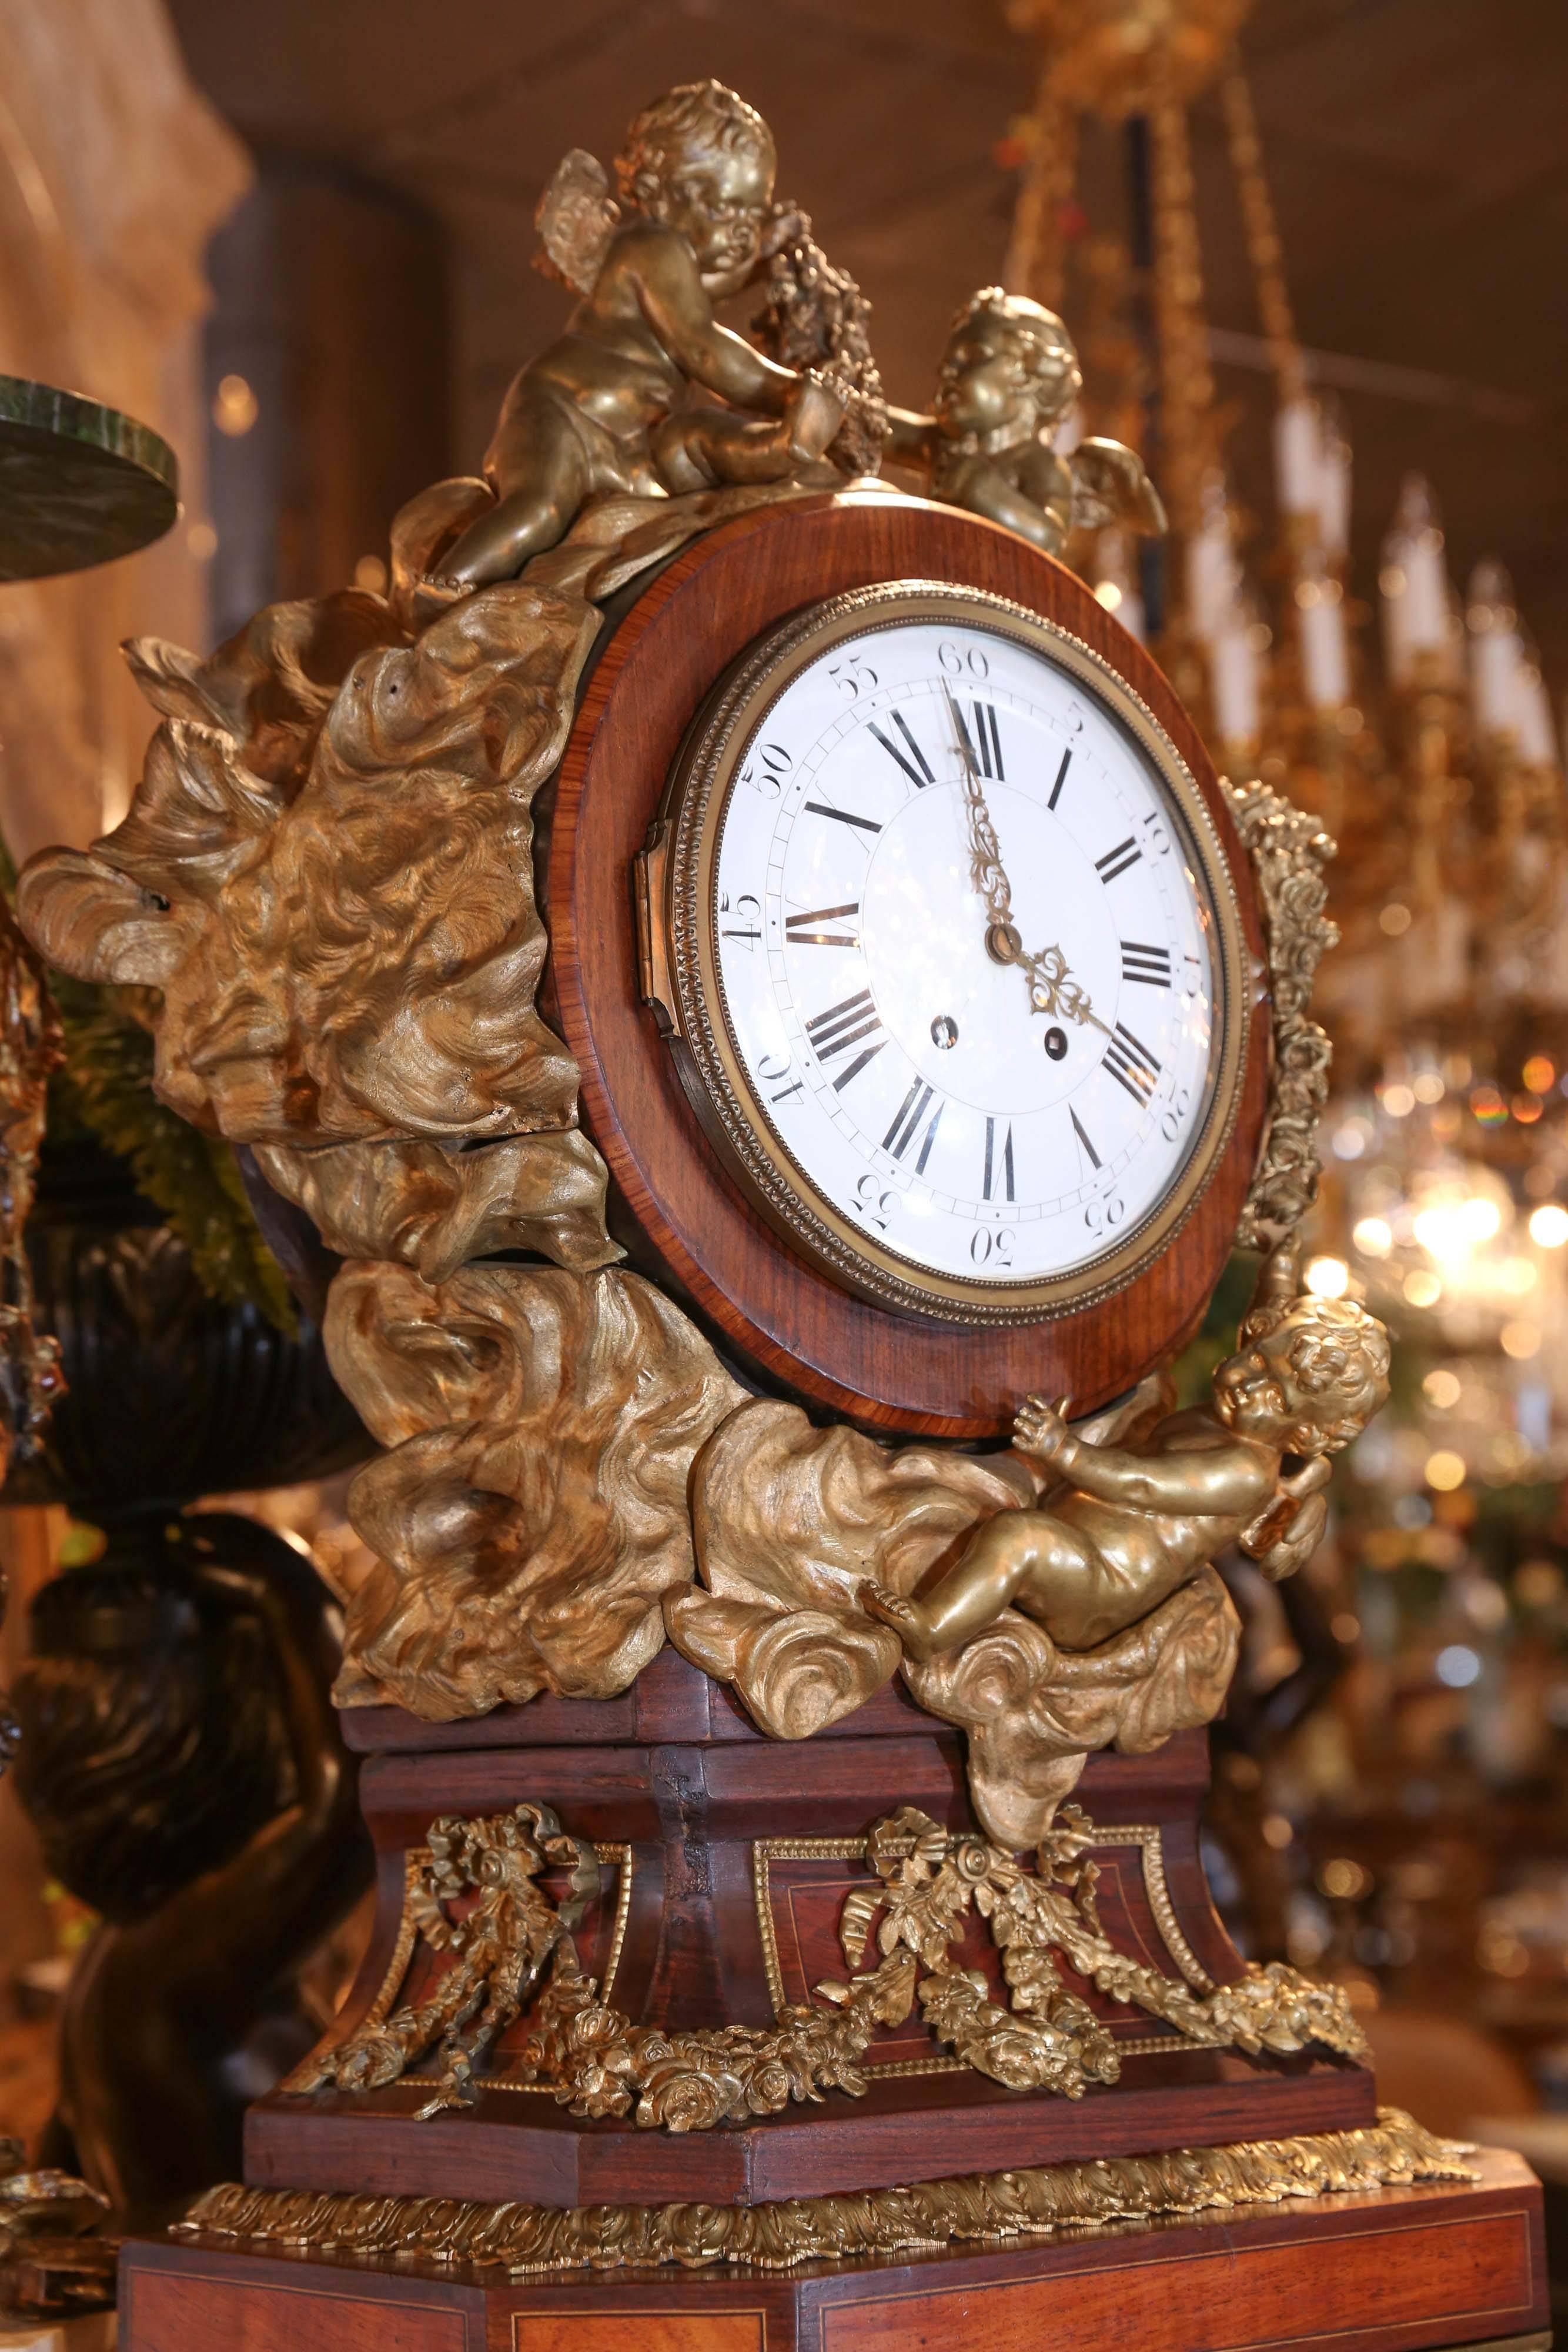 A rare and superb longcase clock from Paris after a model made by Riesner.
Heavily decorated with elaborate bronze cherub and putti mounts.
Kingwood and rosewood case with marquetry inlay. the model made by
Riesner is in the Louvre. A photo of